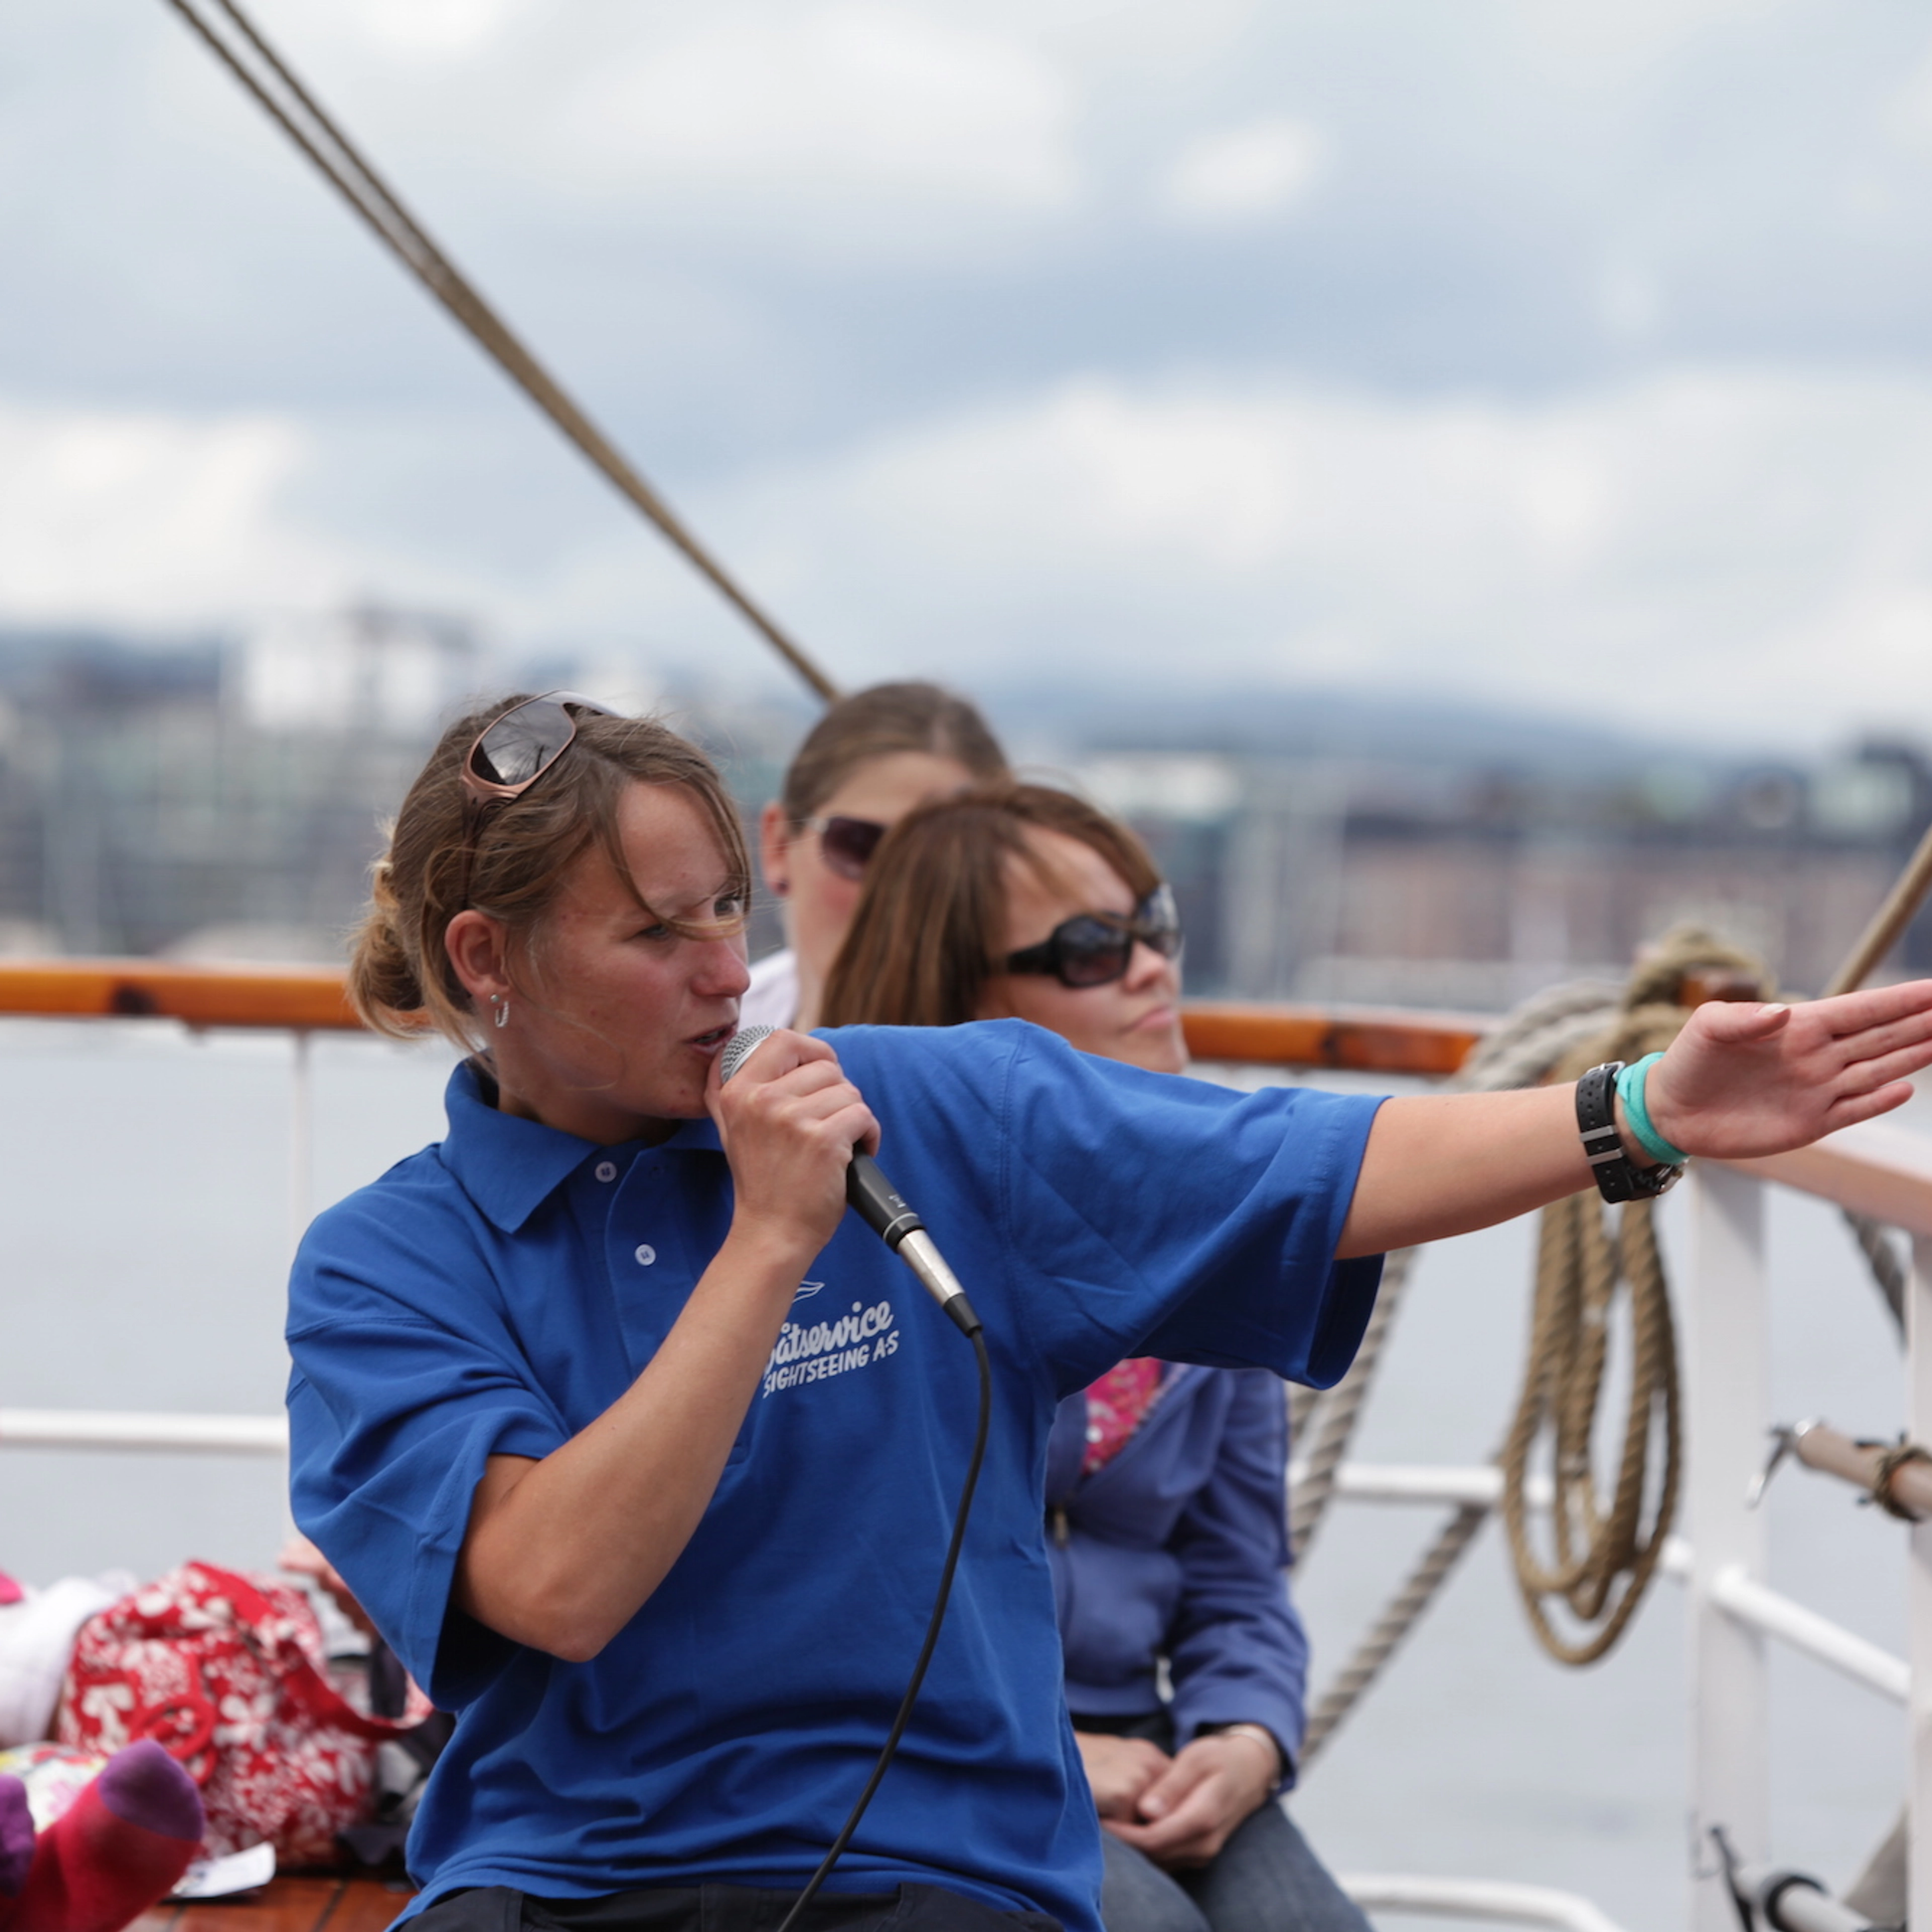 Guide on the Oslo Fjord Cruise - Oslo, Norway